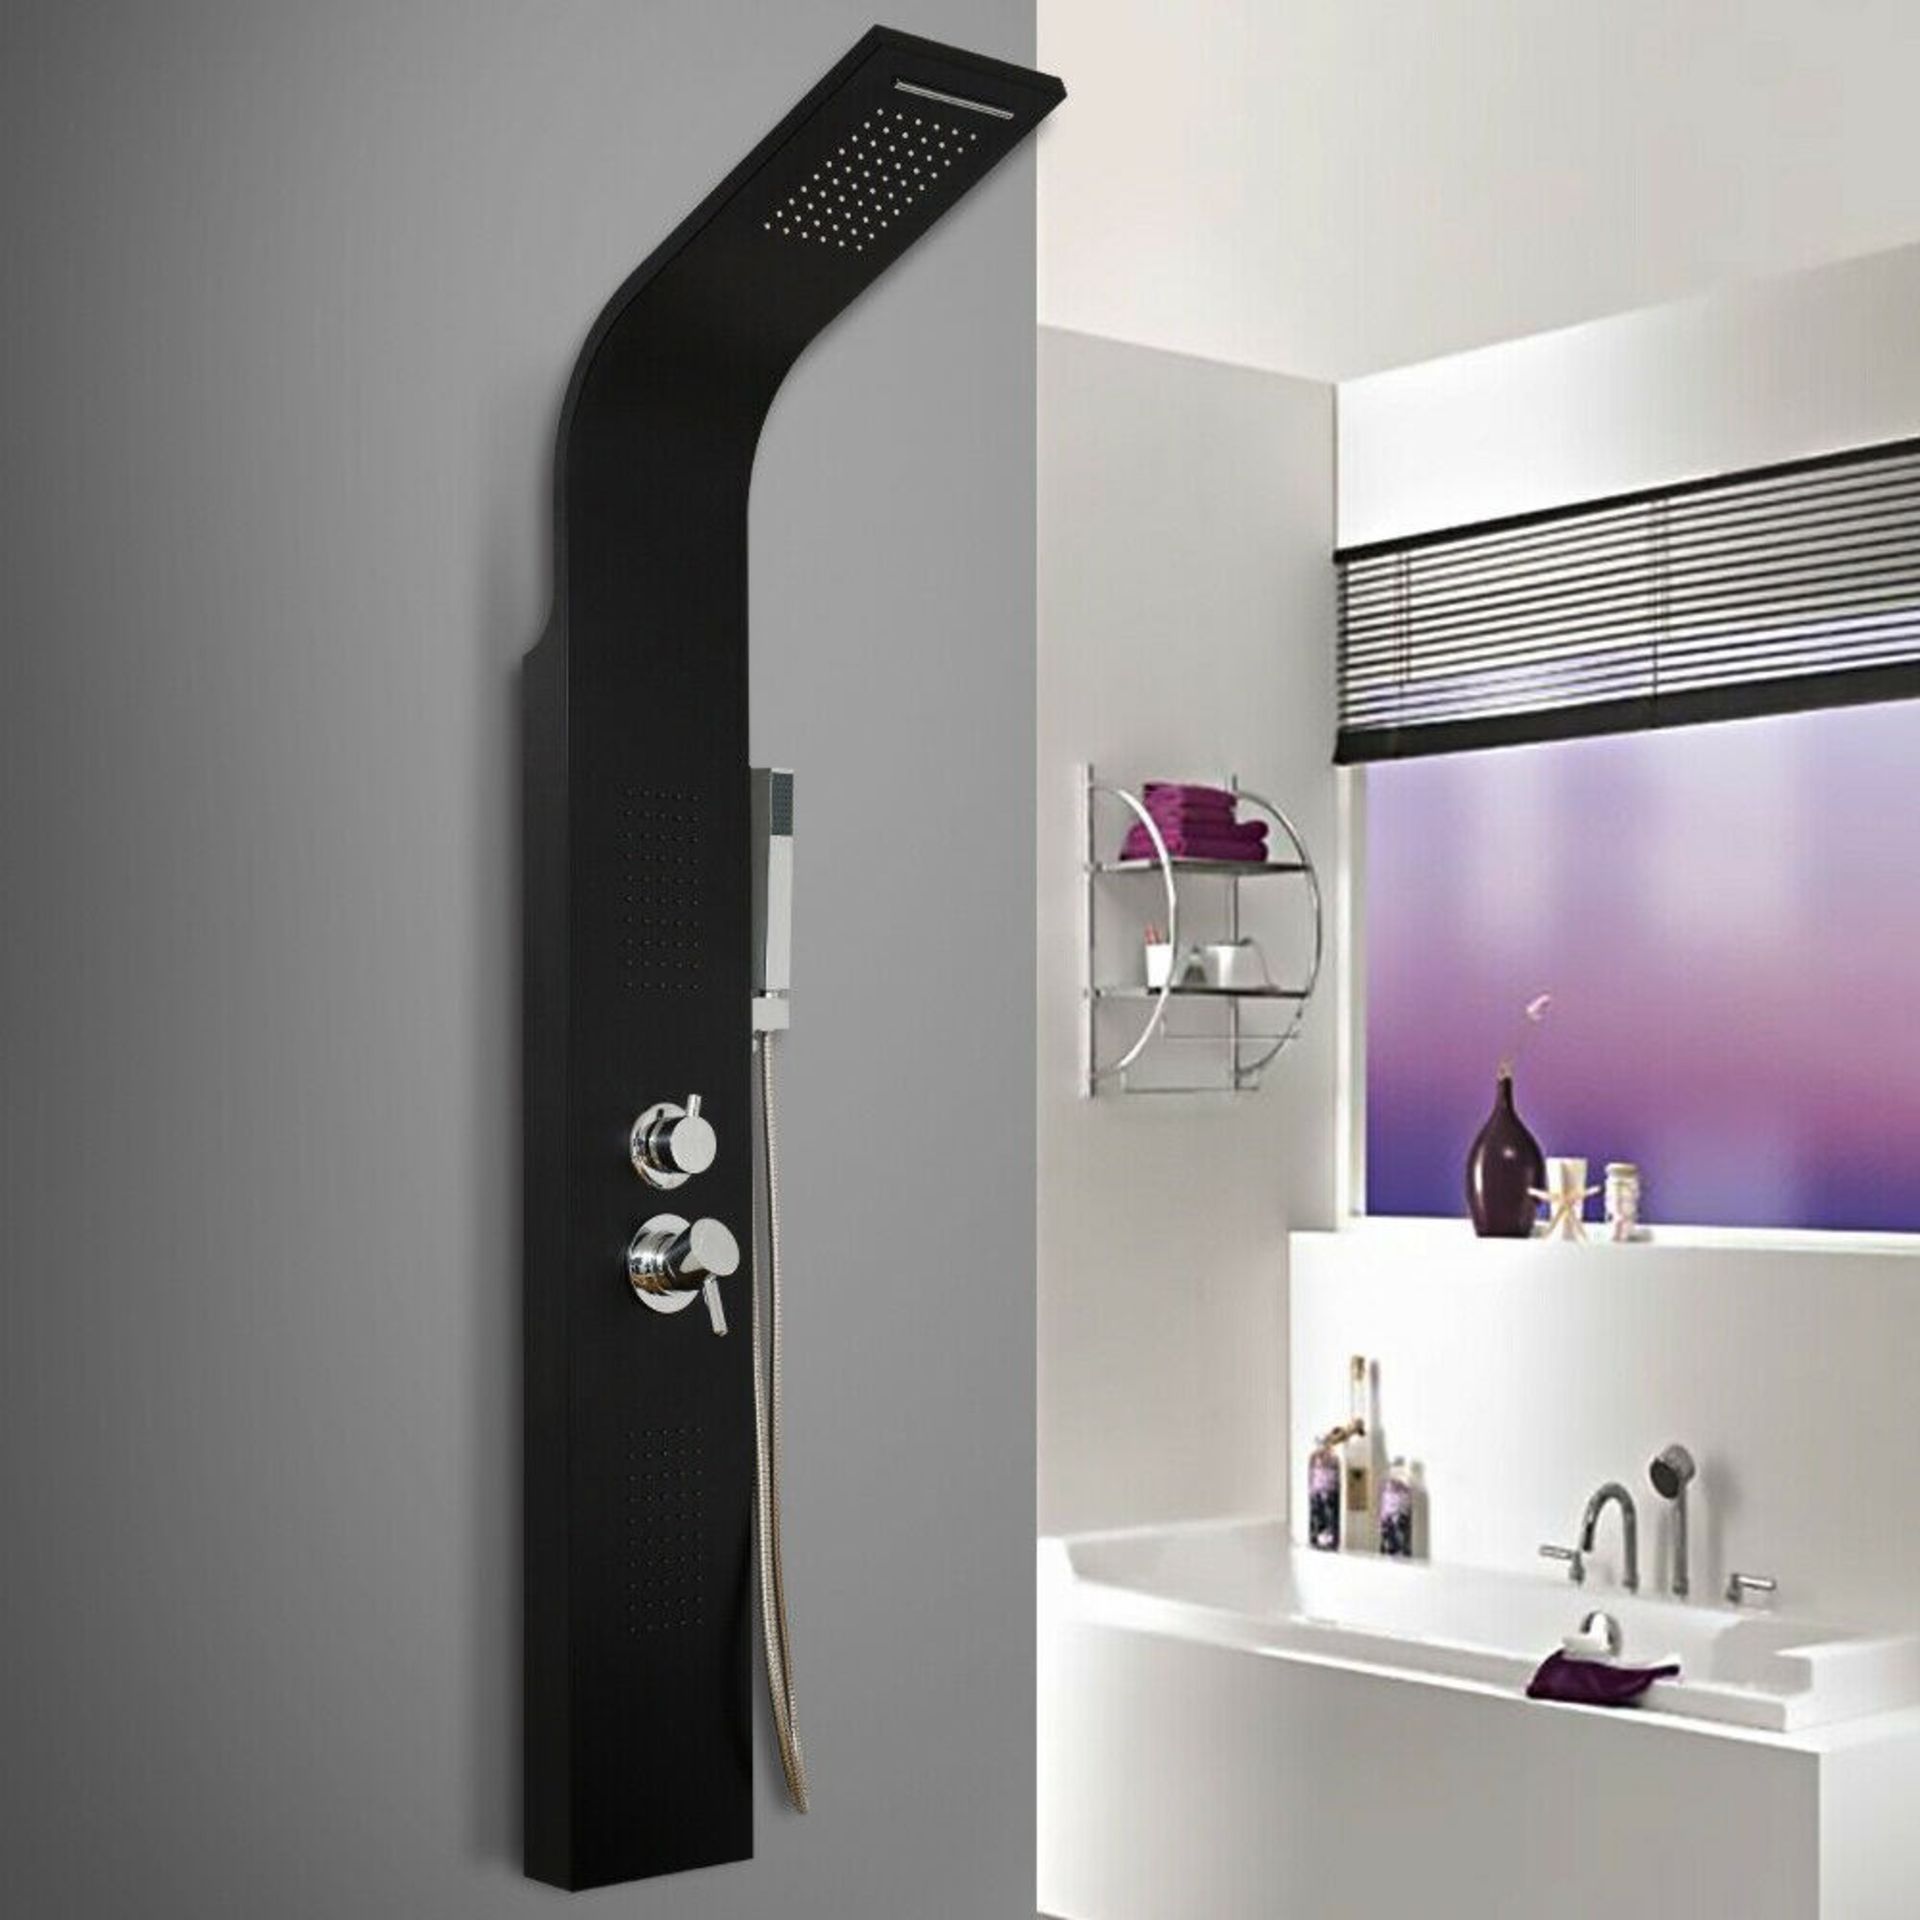 (TL3) Modern Black Column Bathroom Waterfall Mixer Shower Panel With Body Jet. This Black Show... - Image 2 of 3